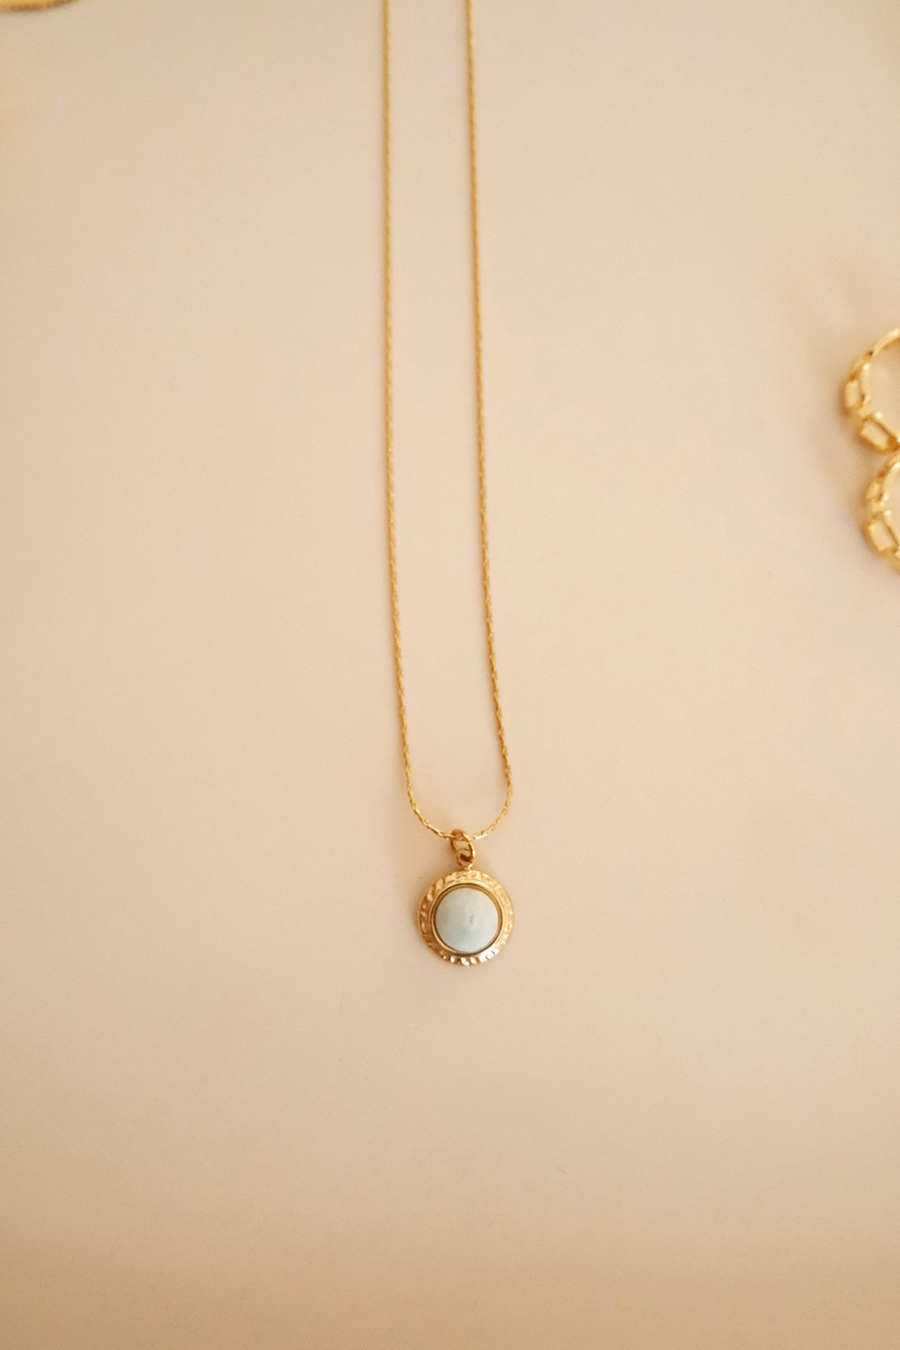 Waterproof - Lily necklace